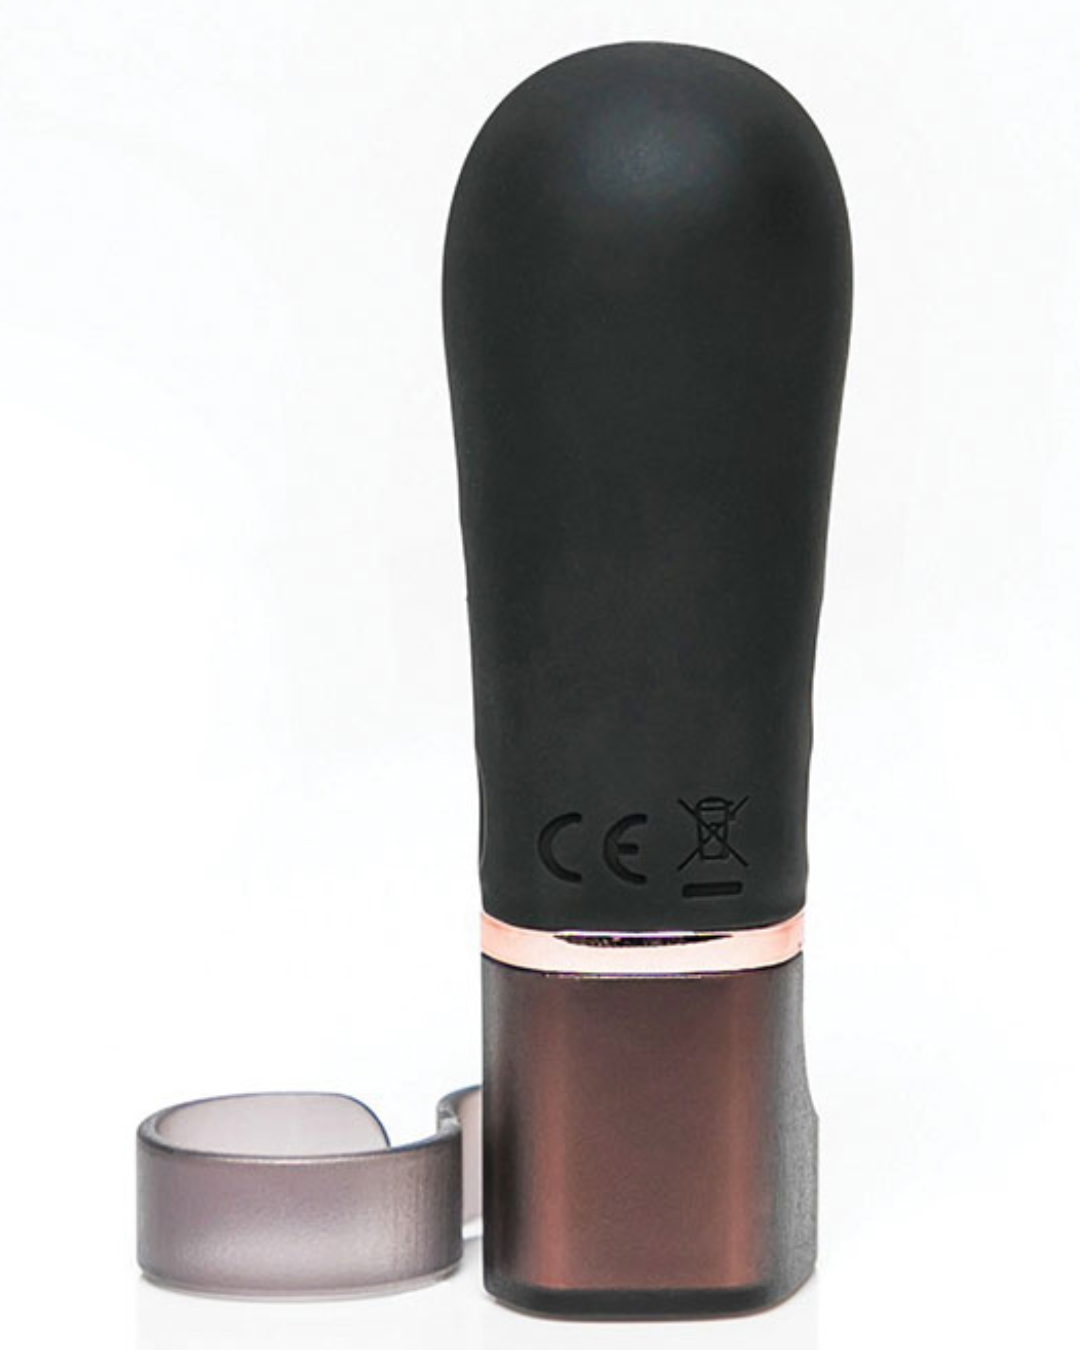 Hot Octopuss Digit Silicone Rechargeable Finger Vibrator view of the bottom of the vibrator